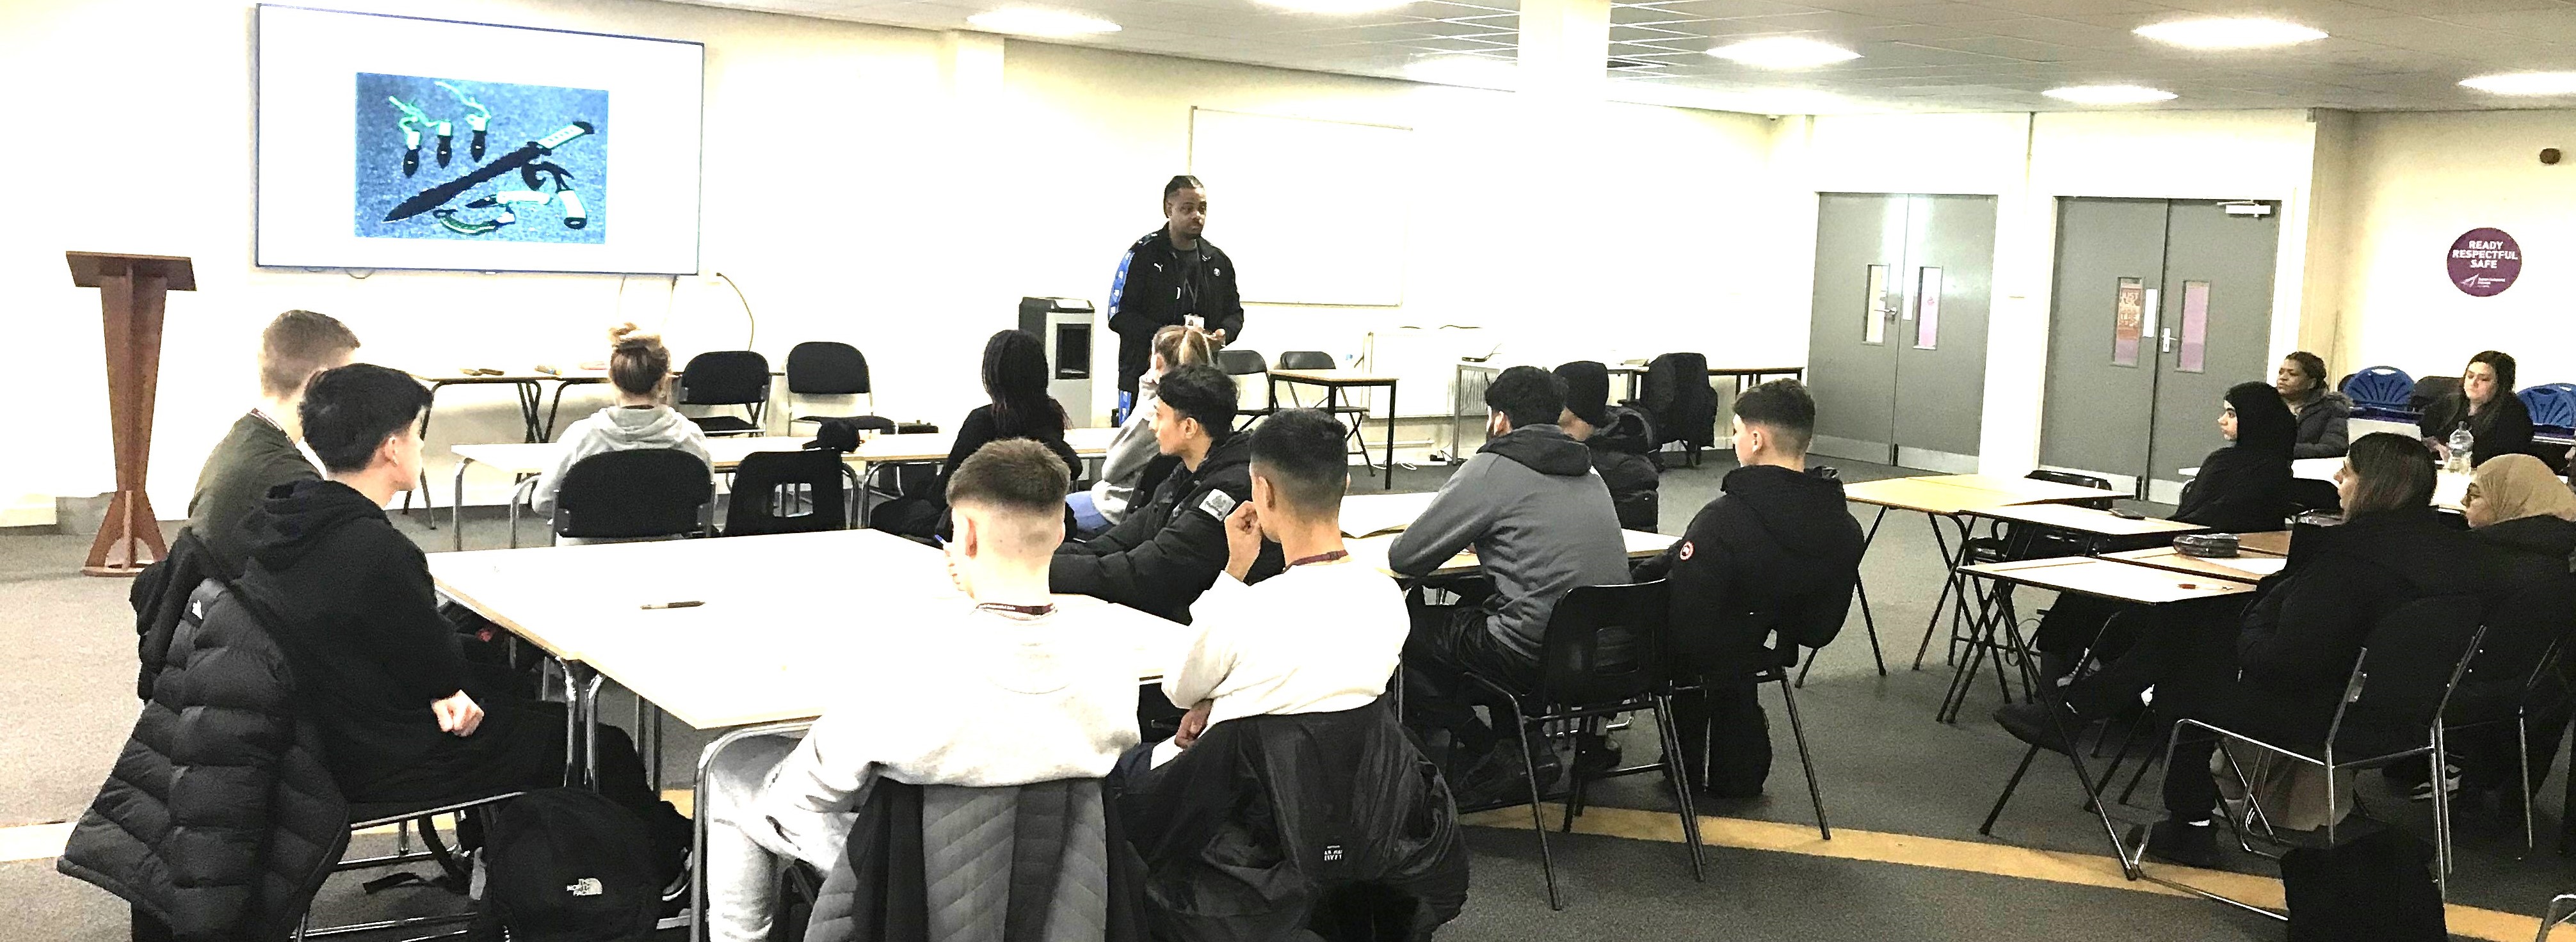 Malachi from Ambitious Lives speaks to students about knife crime.